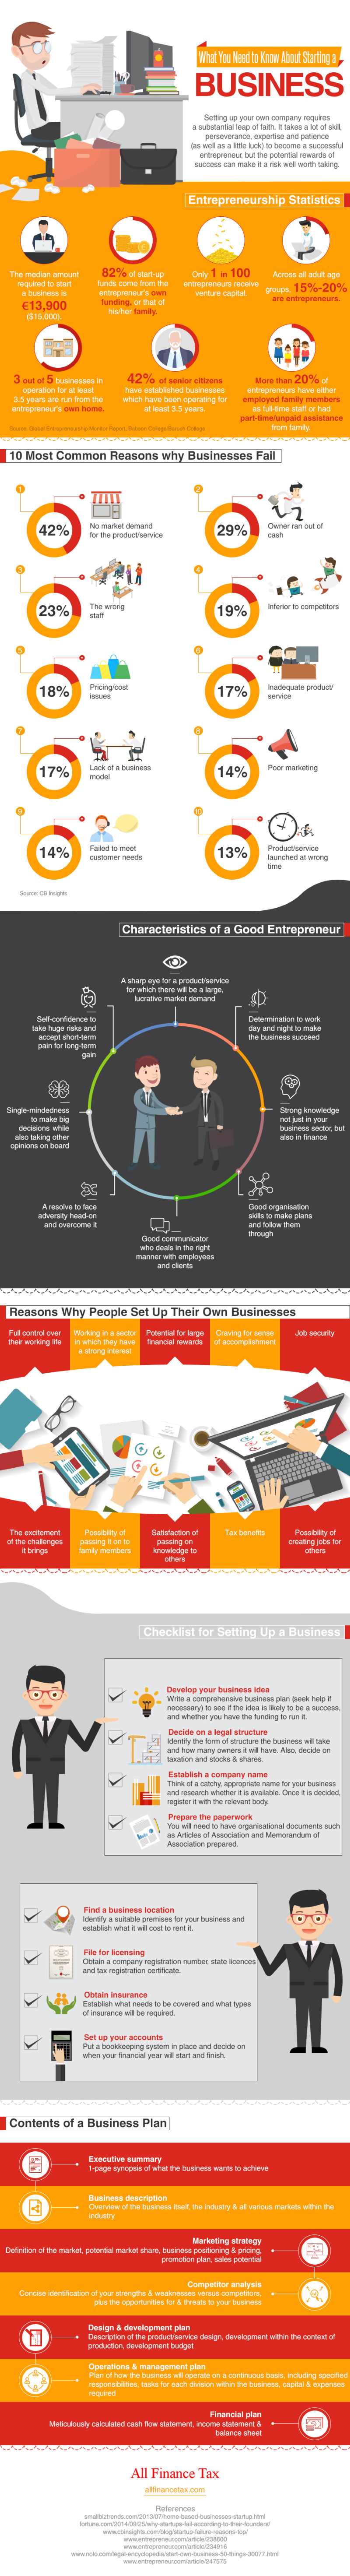 starting-a-business-infographic